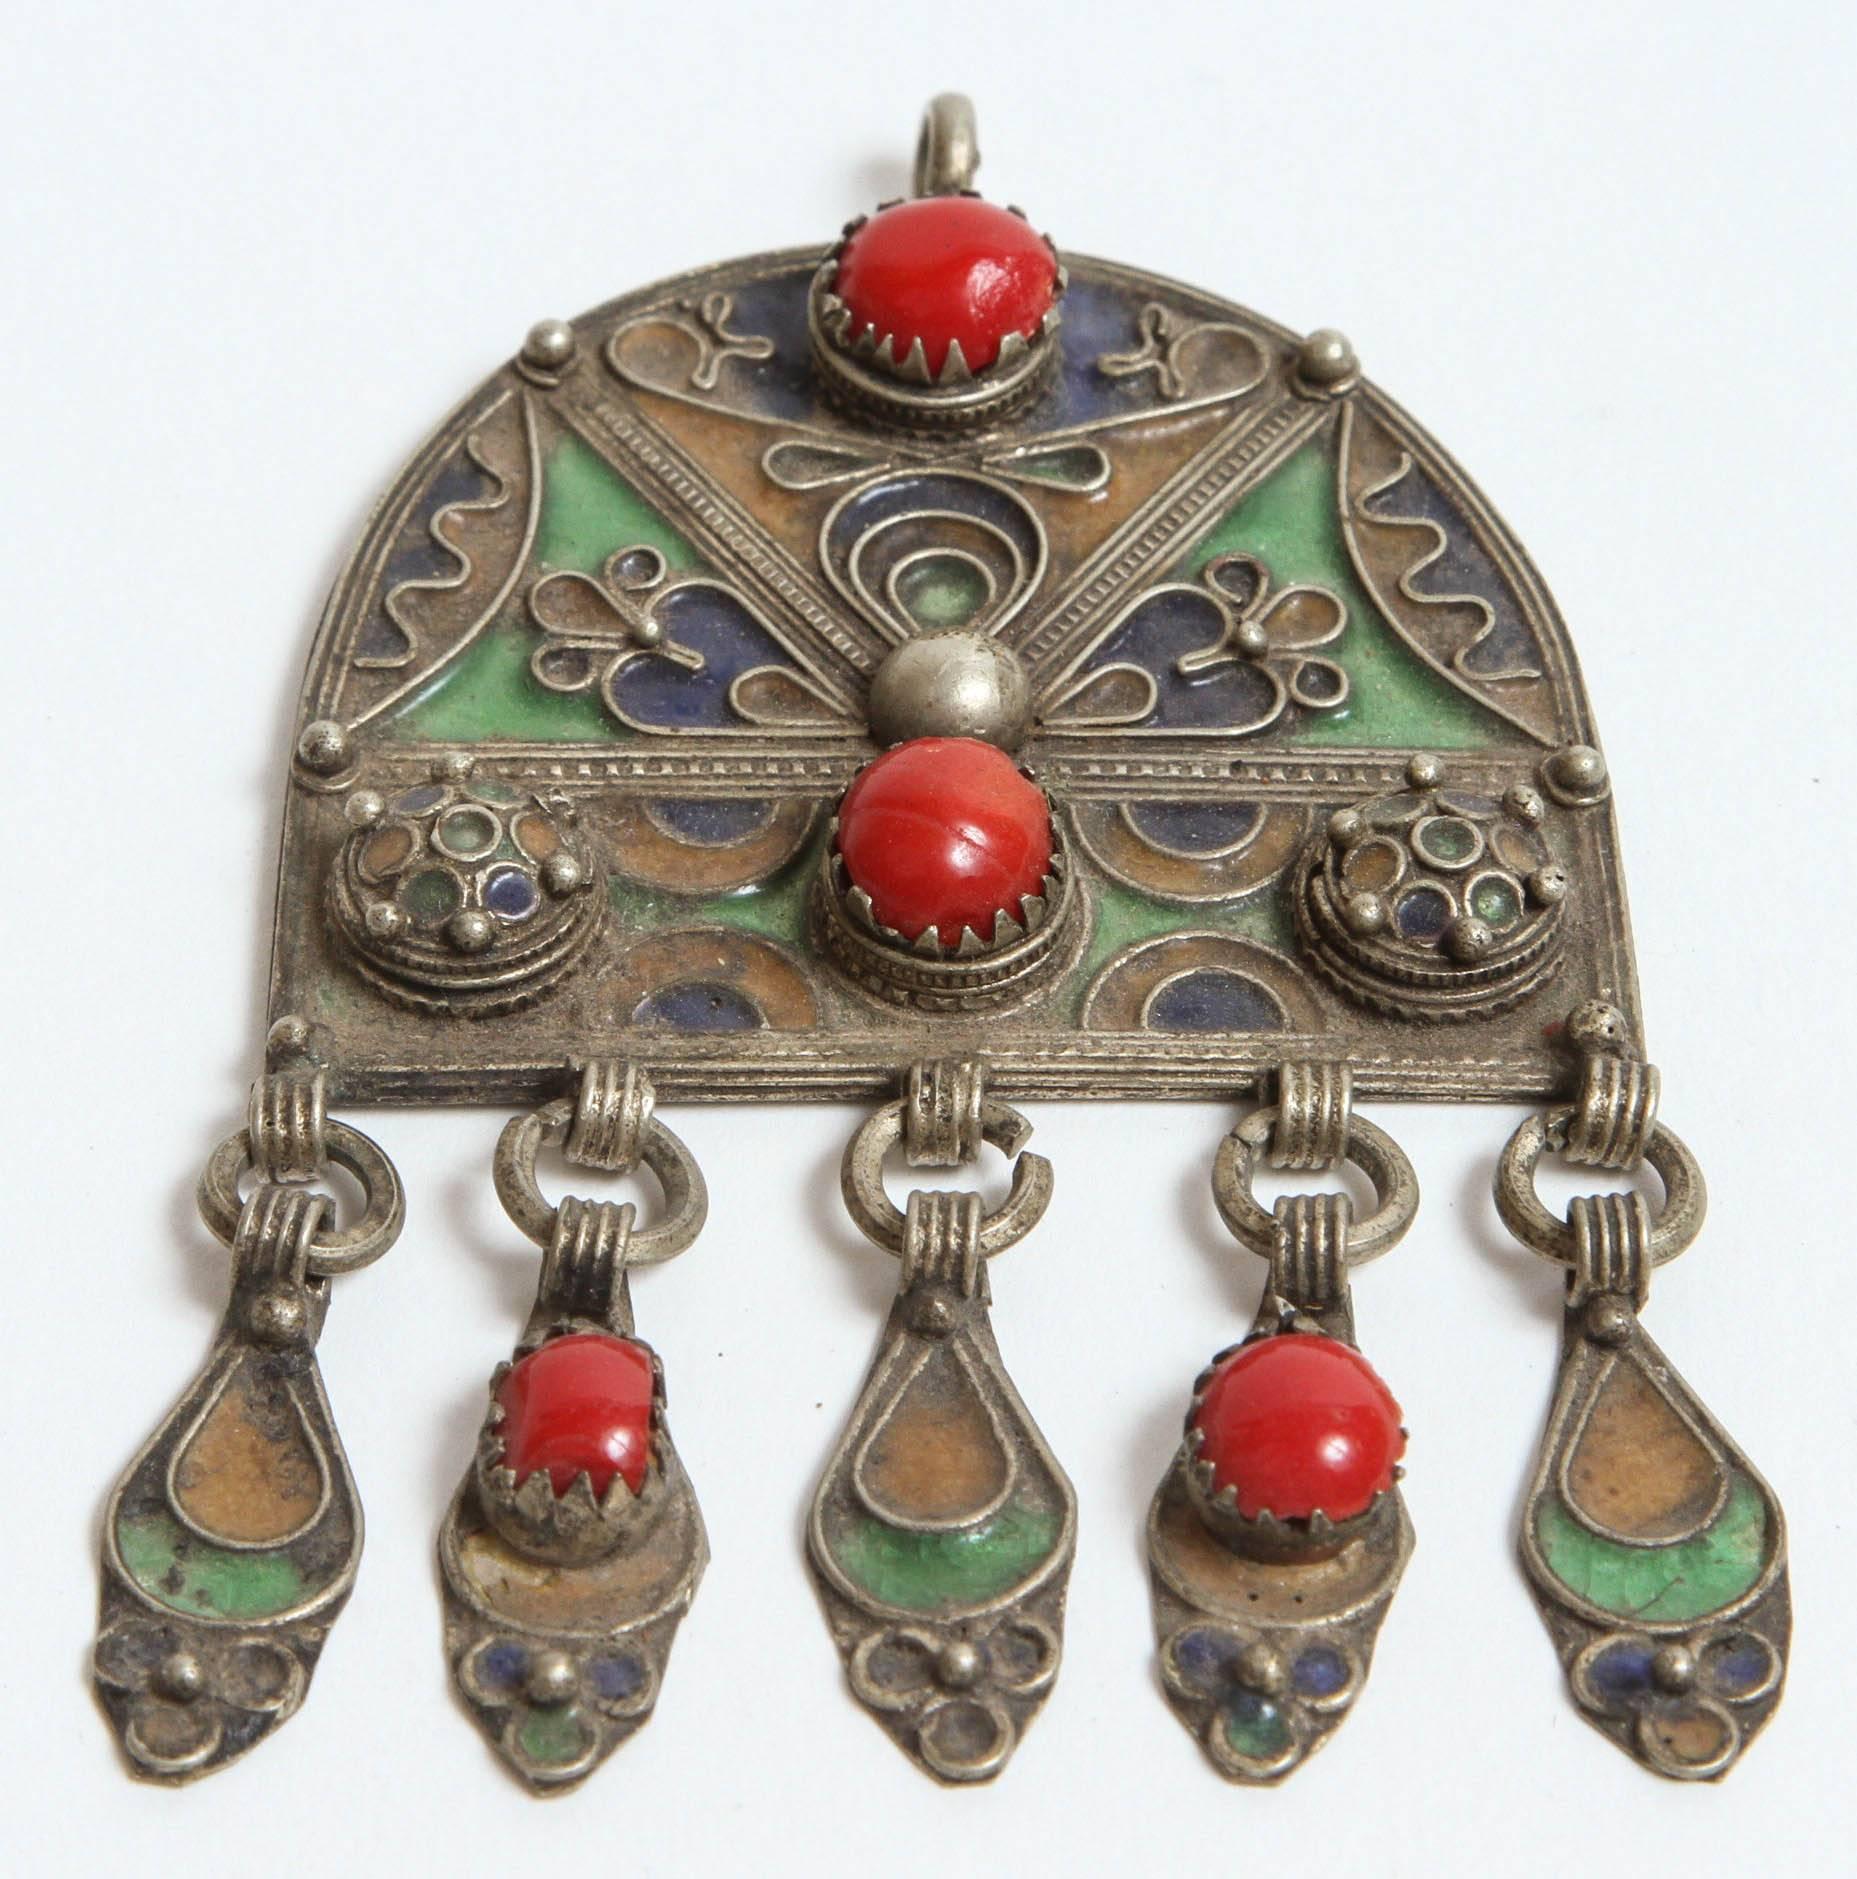 Beautiful vintage Moroccan ethnic fibula pendant or pin brooch.
This Ethnic Moroccan silver pendant jewelry is enameled with yellow, green and blue with cabochon of red glass beads.
Handcrafted in Morocco by the Berber women.
Dimensions: H 3.5 in. x